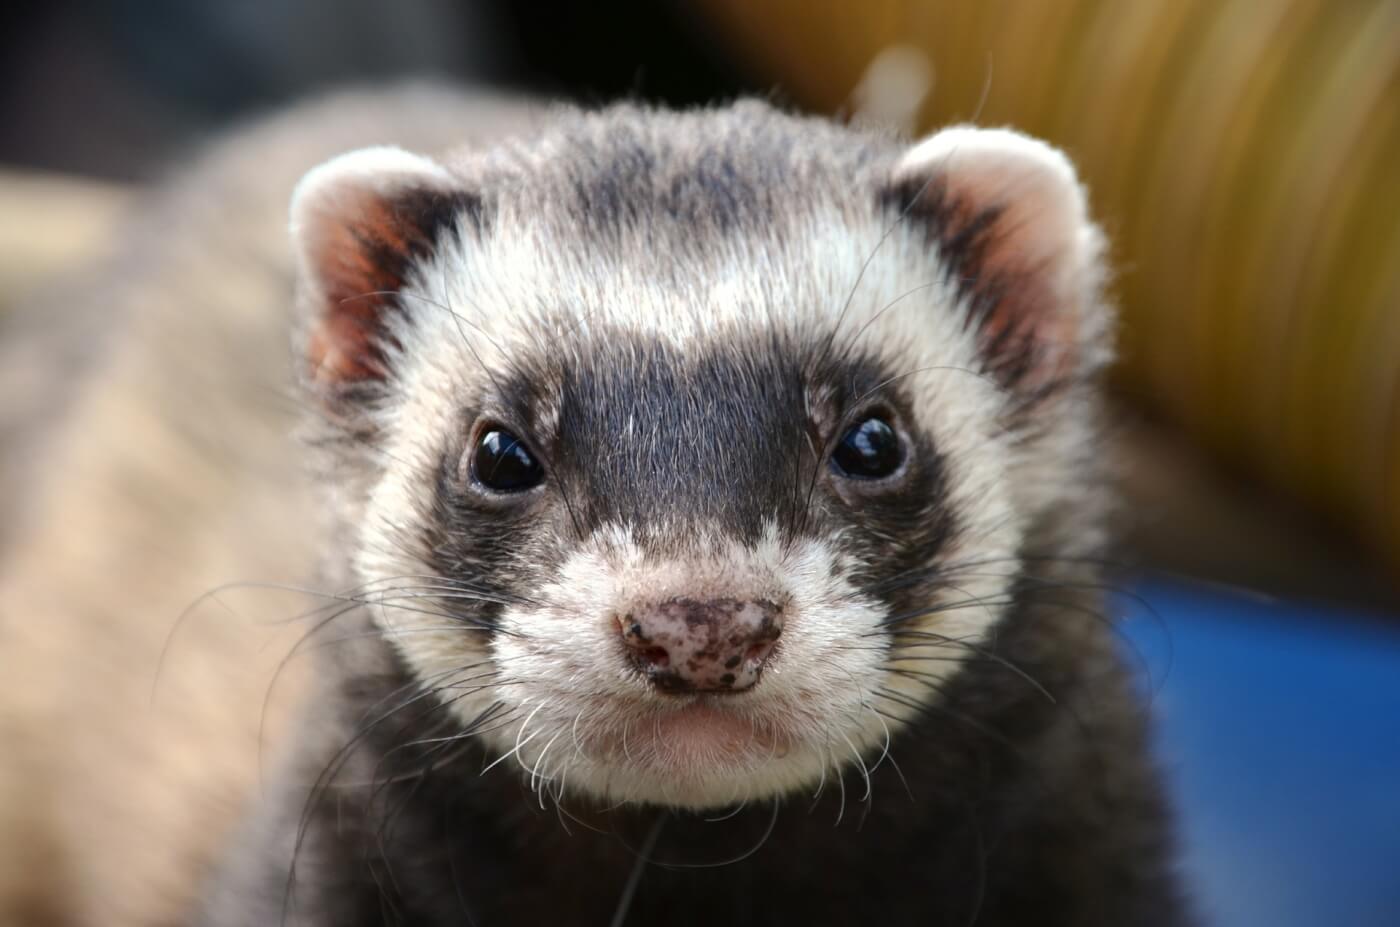 Ferrets for Sale? Why These Animals Aren't 'Pets' | PETA